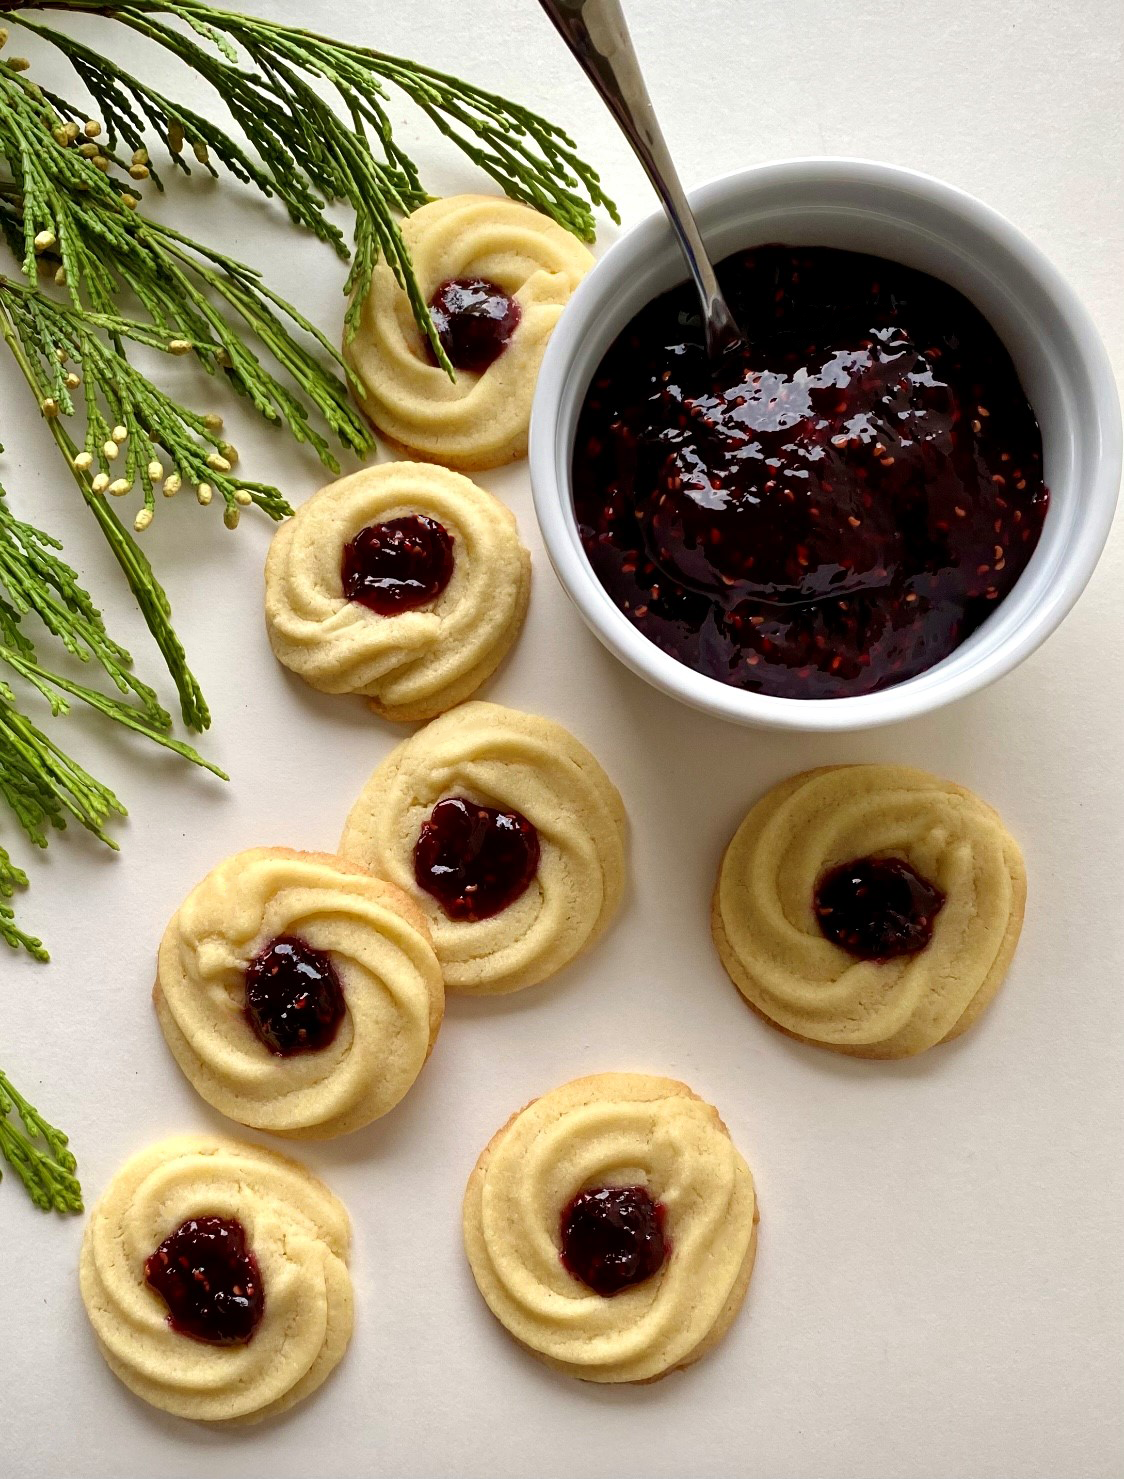 https://www.cookingmamas.com/wp-content/uploads/2020/12/Butter-Cookies-Filled-with-Raspberry-Jam.png